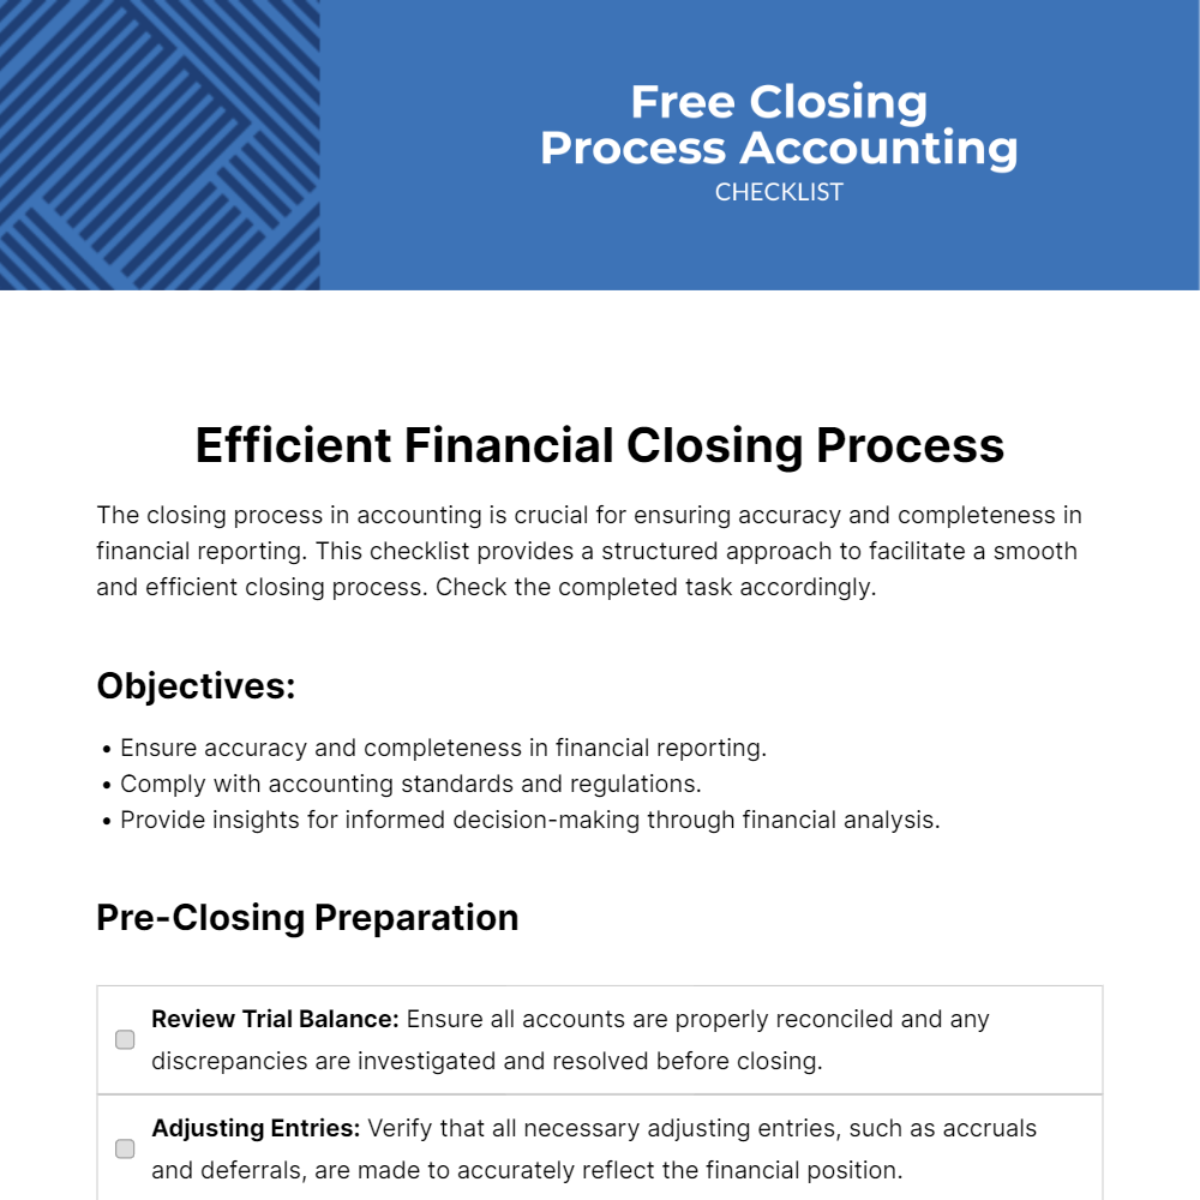 Free Closing Process Accounting Checklist Template